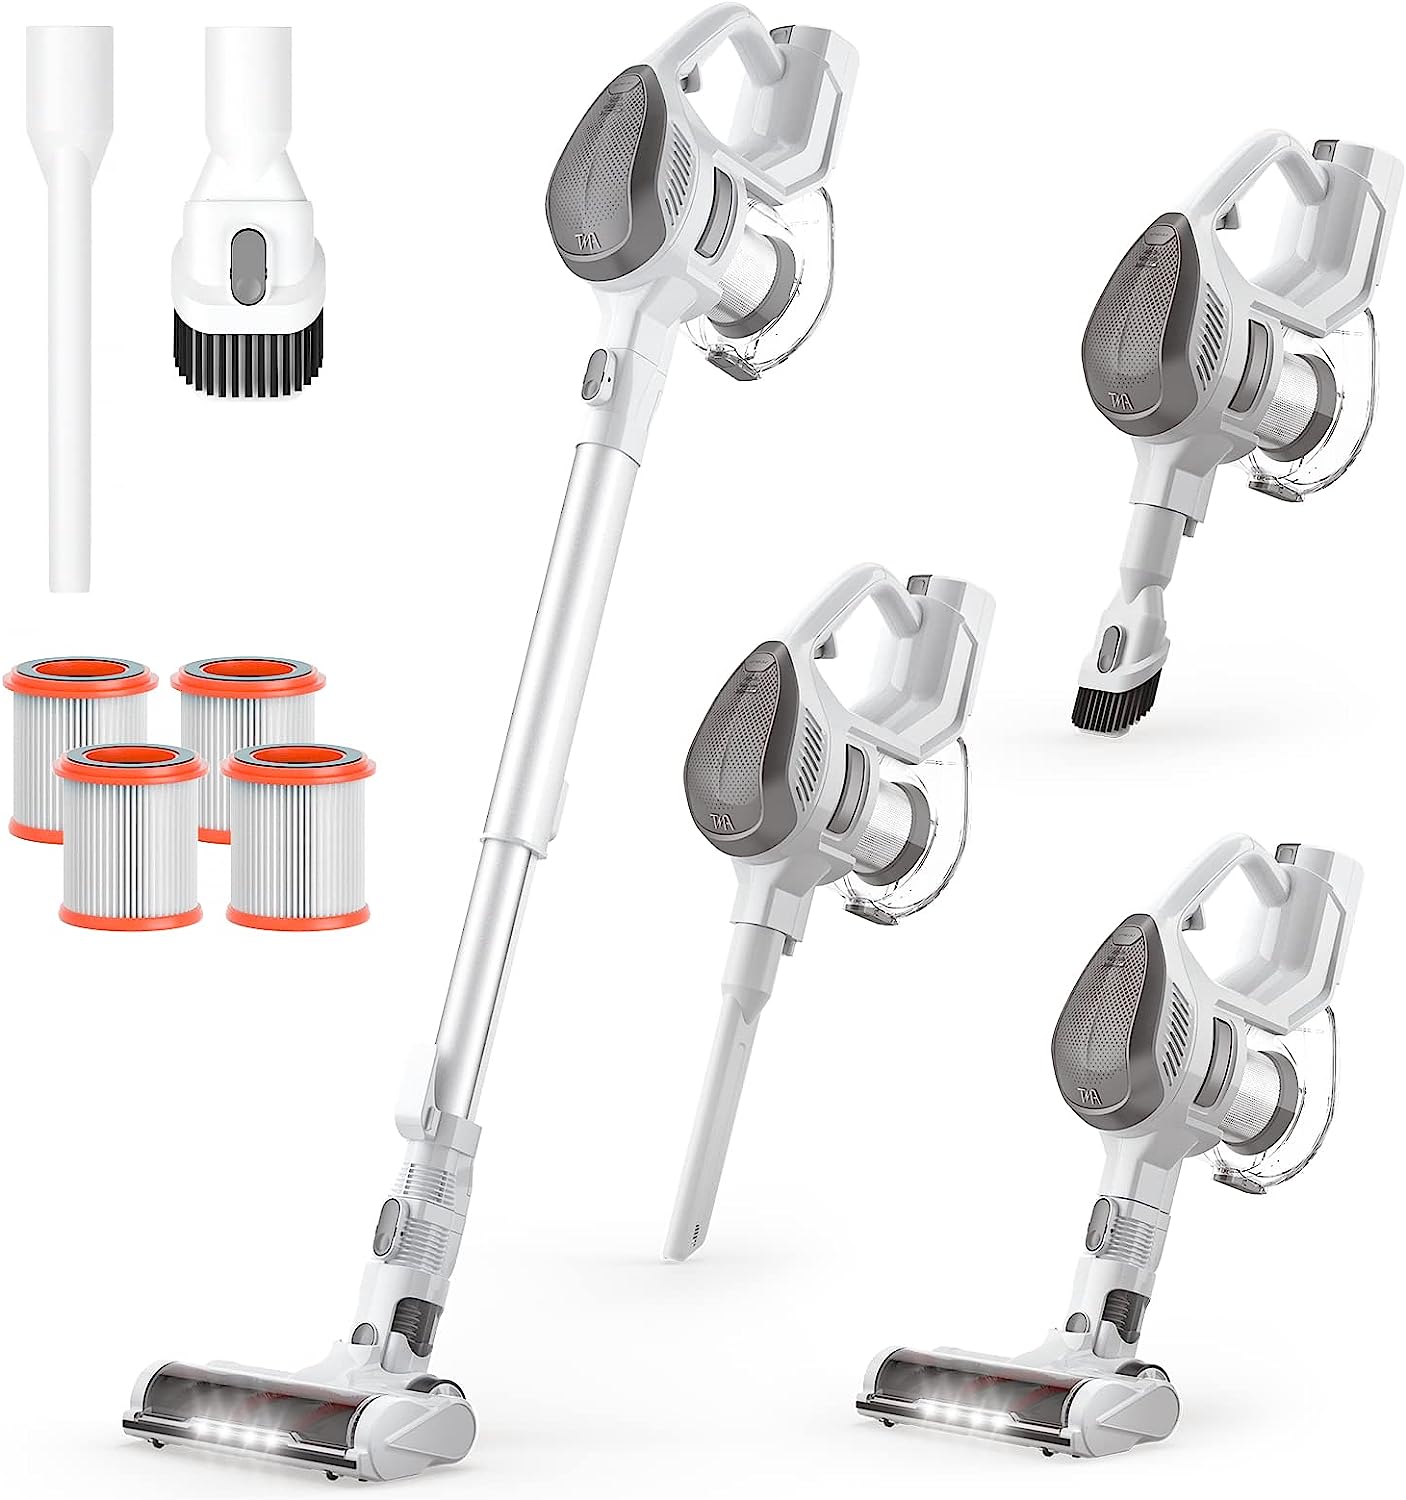 TMA Cordless Vacuum Cleaner, 6 in 1 Rechargeable Stick [...]